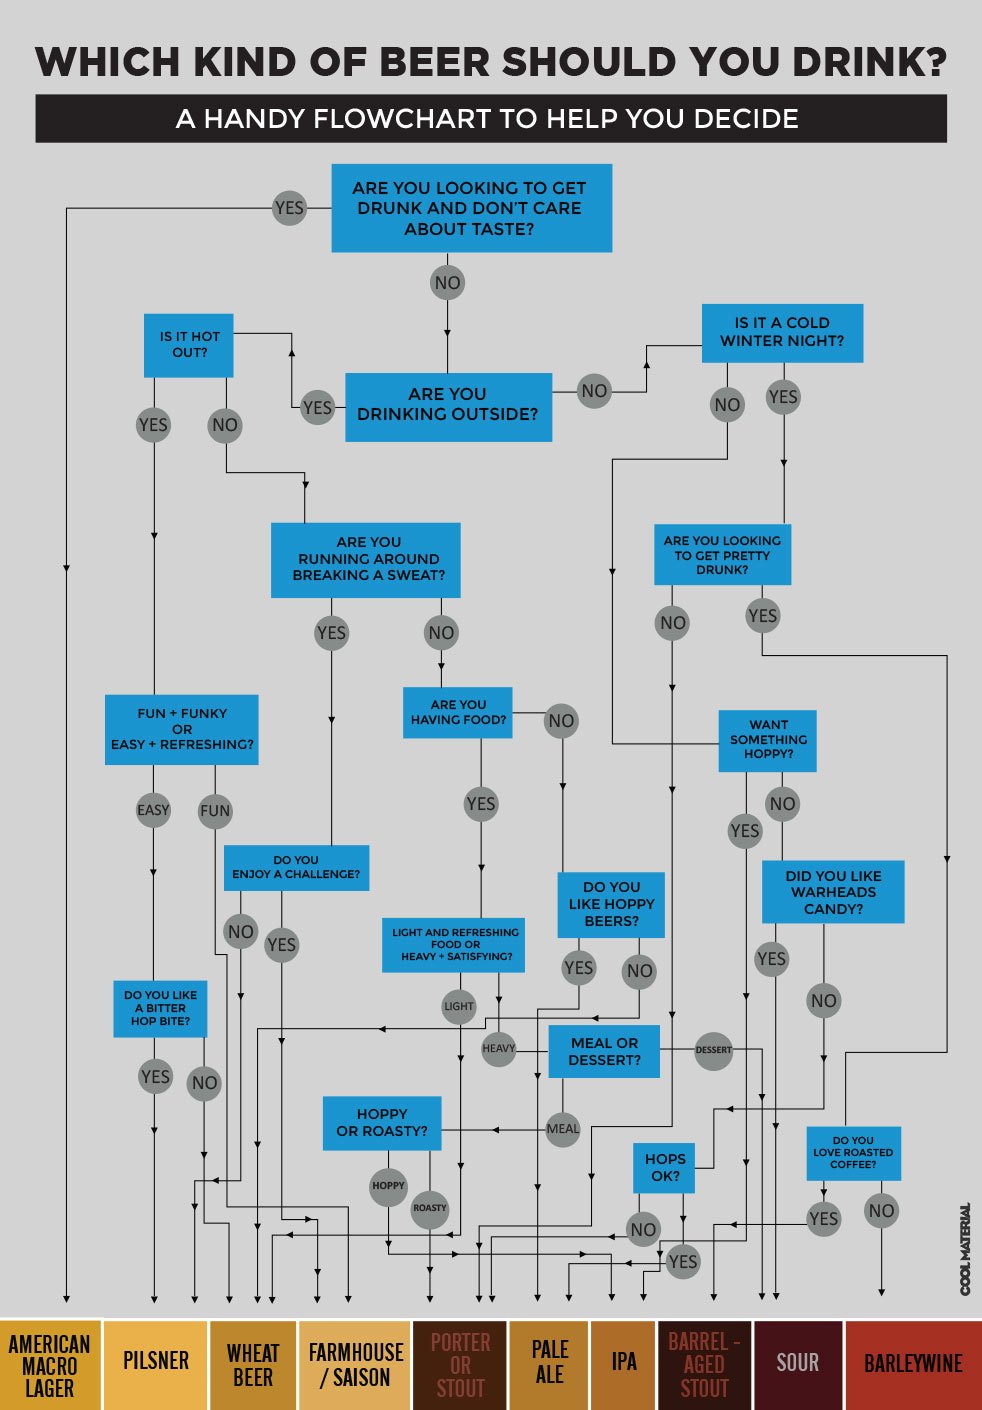 Flowchart: What Style of Beer Should You Drink?